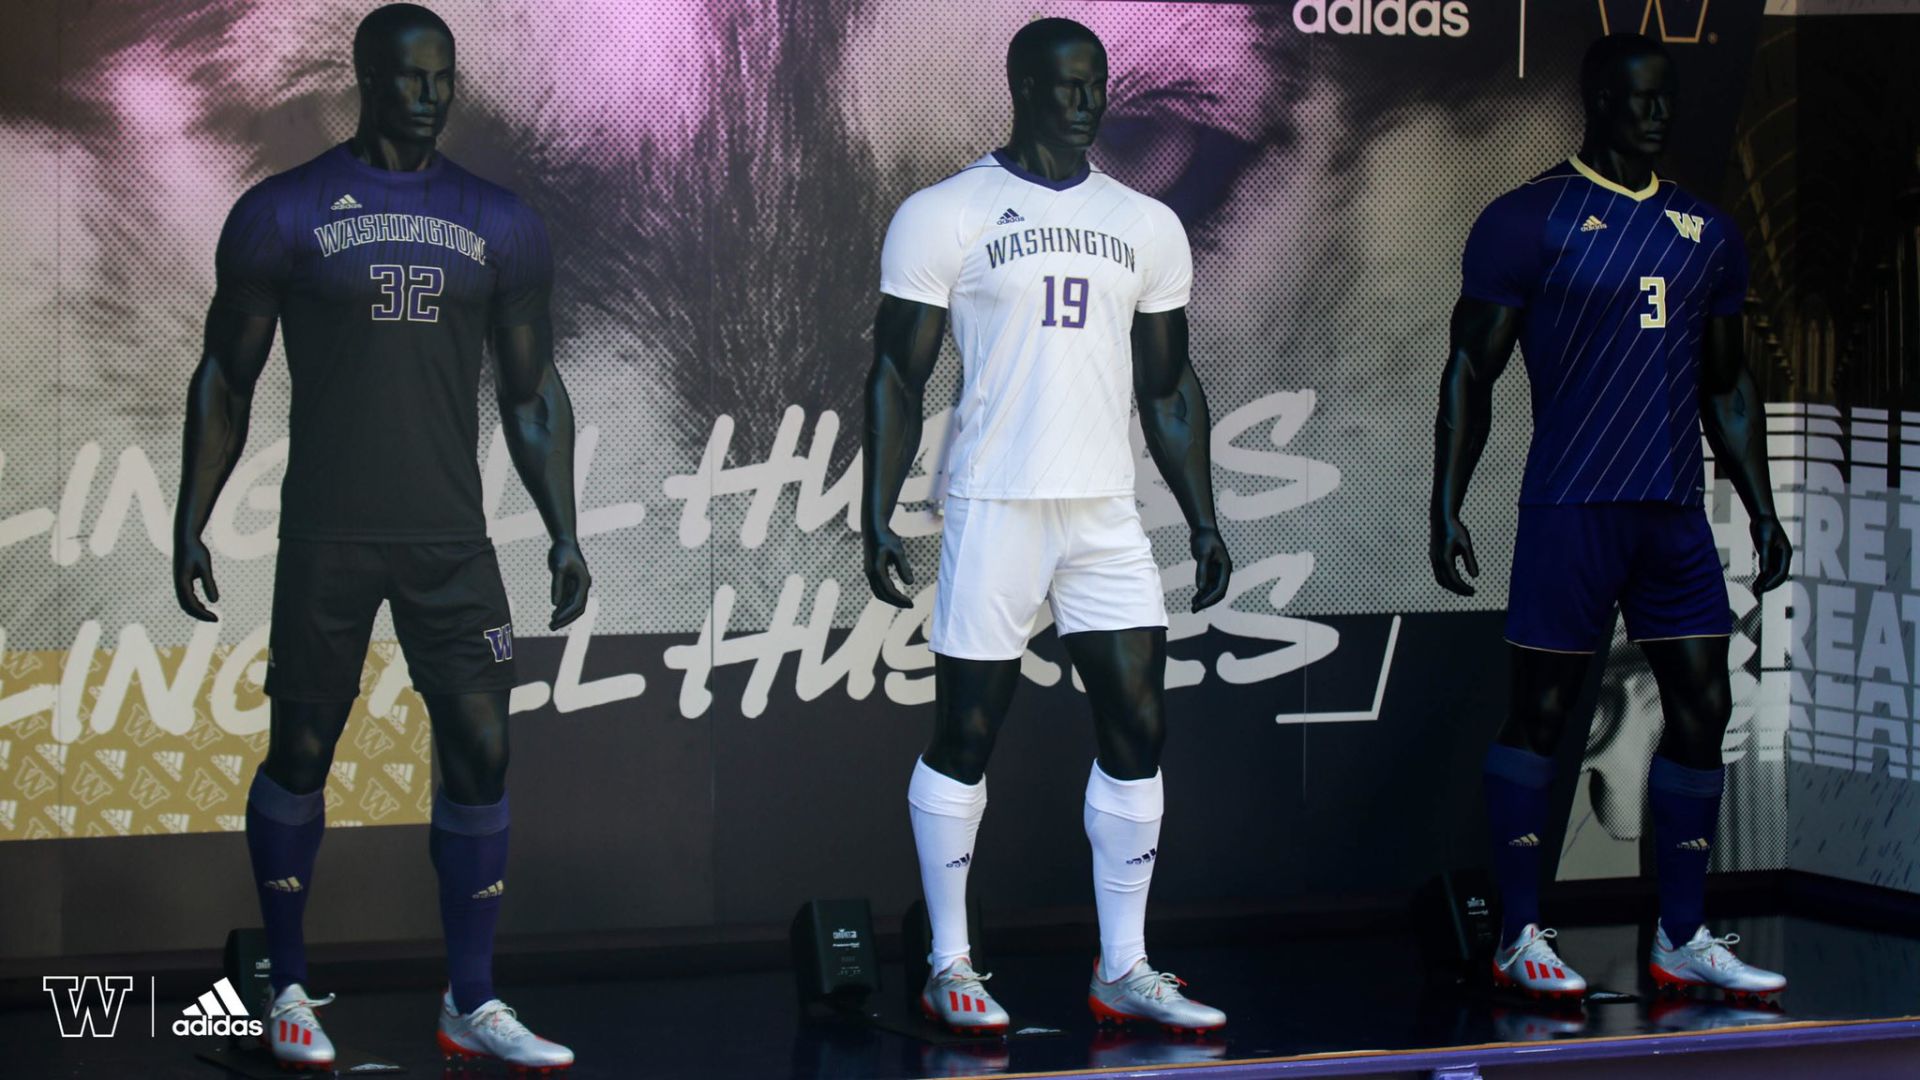 adidas soccer uniforms for teams package